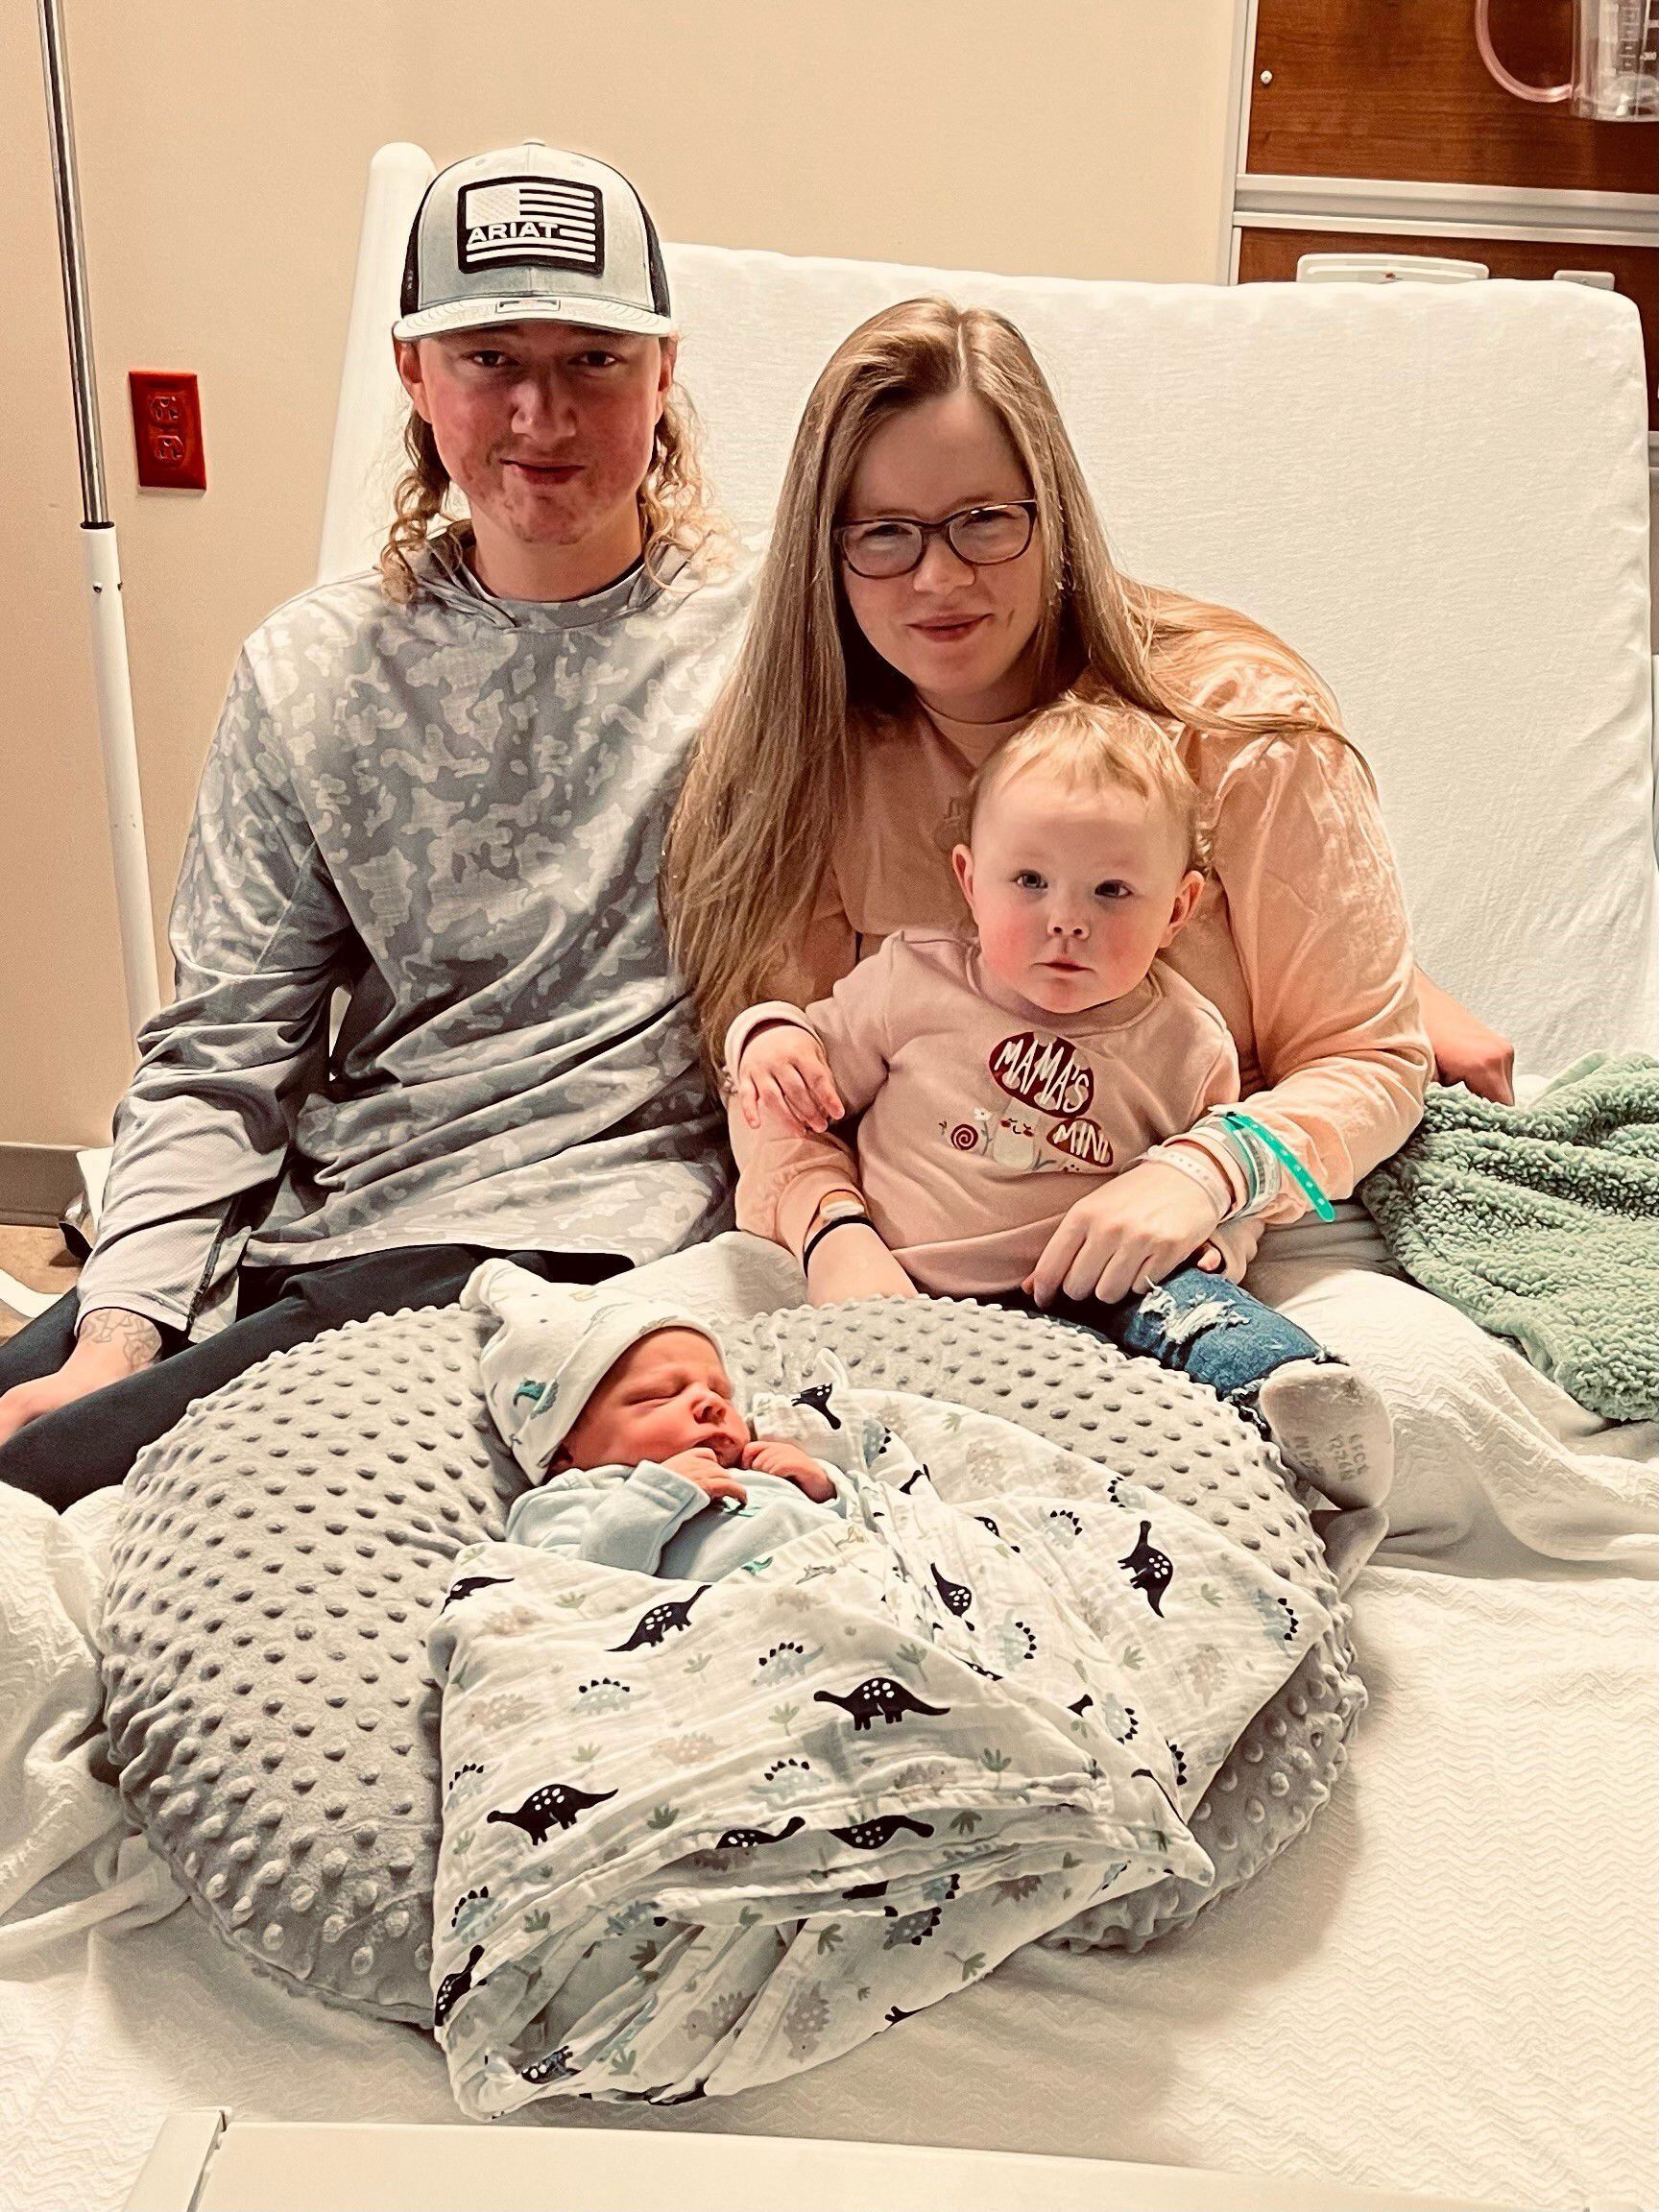 Miami Valley Hospital welcomes first baby born on New Year's Day 2023